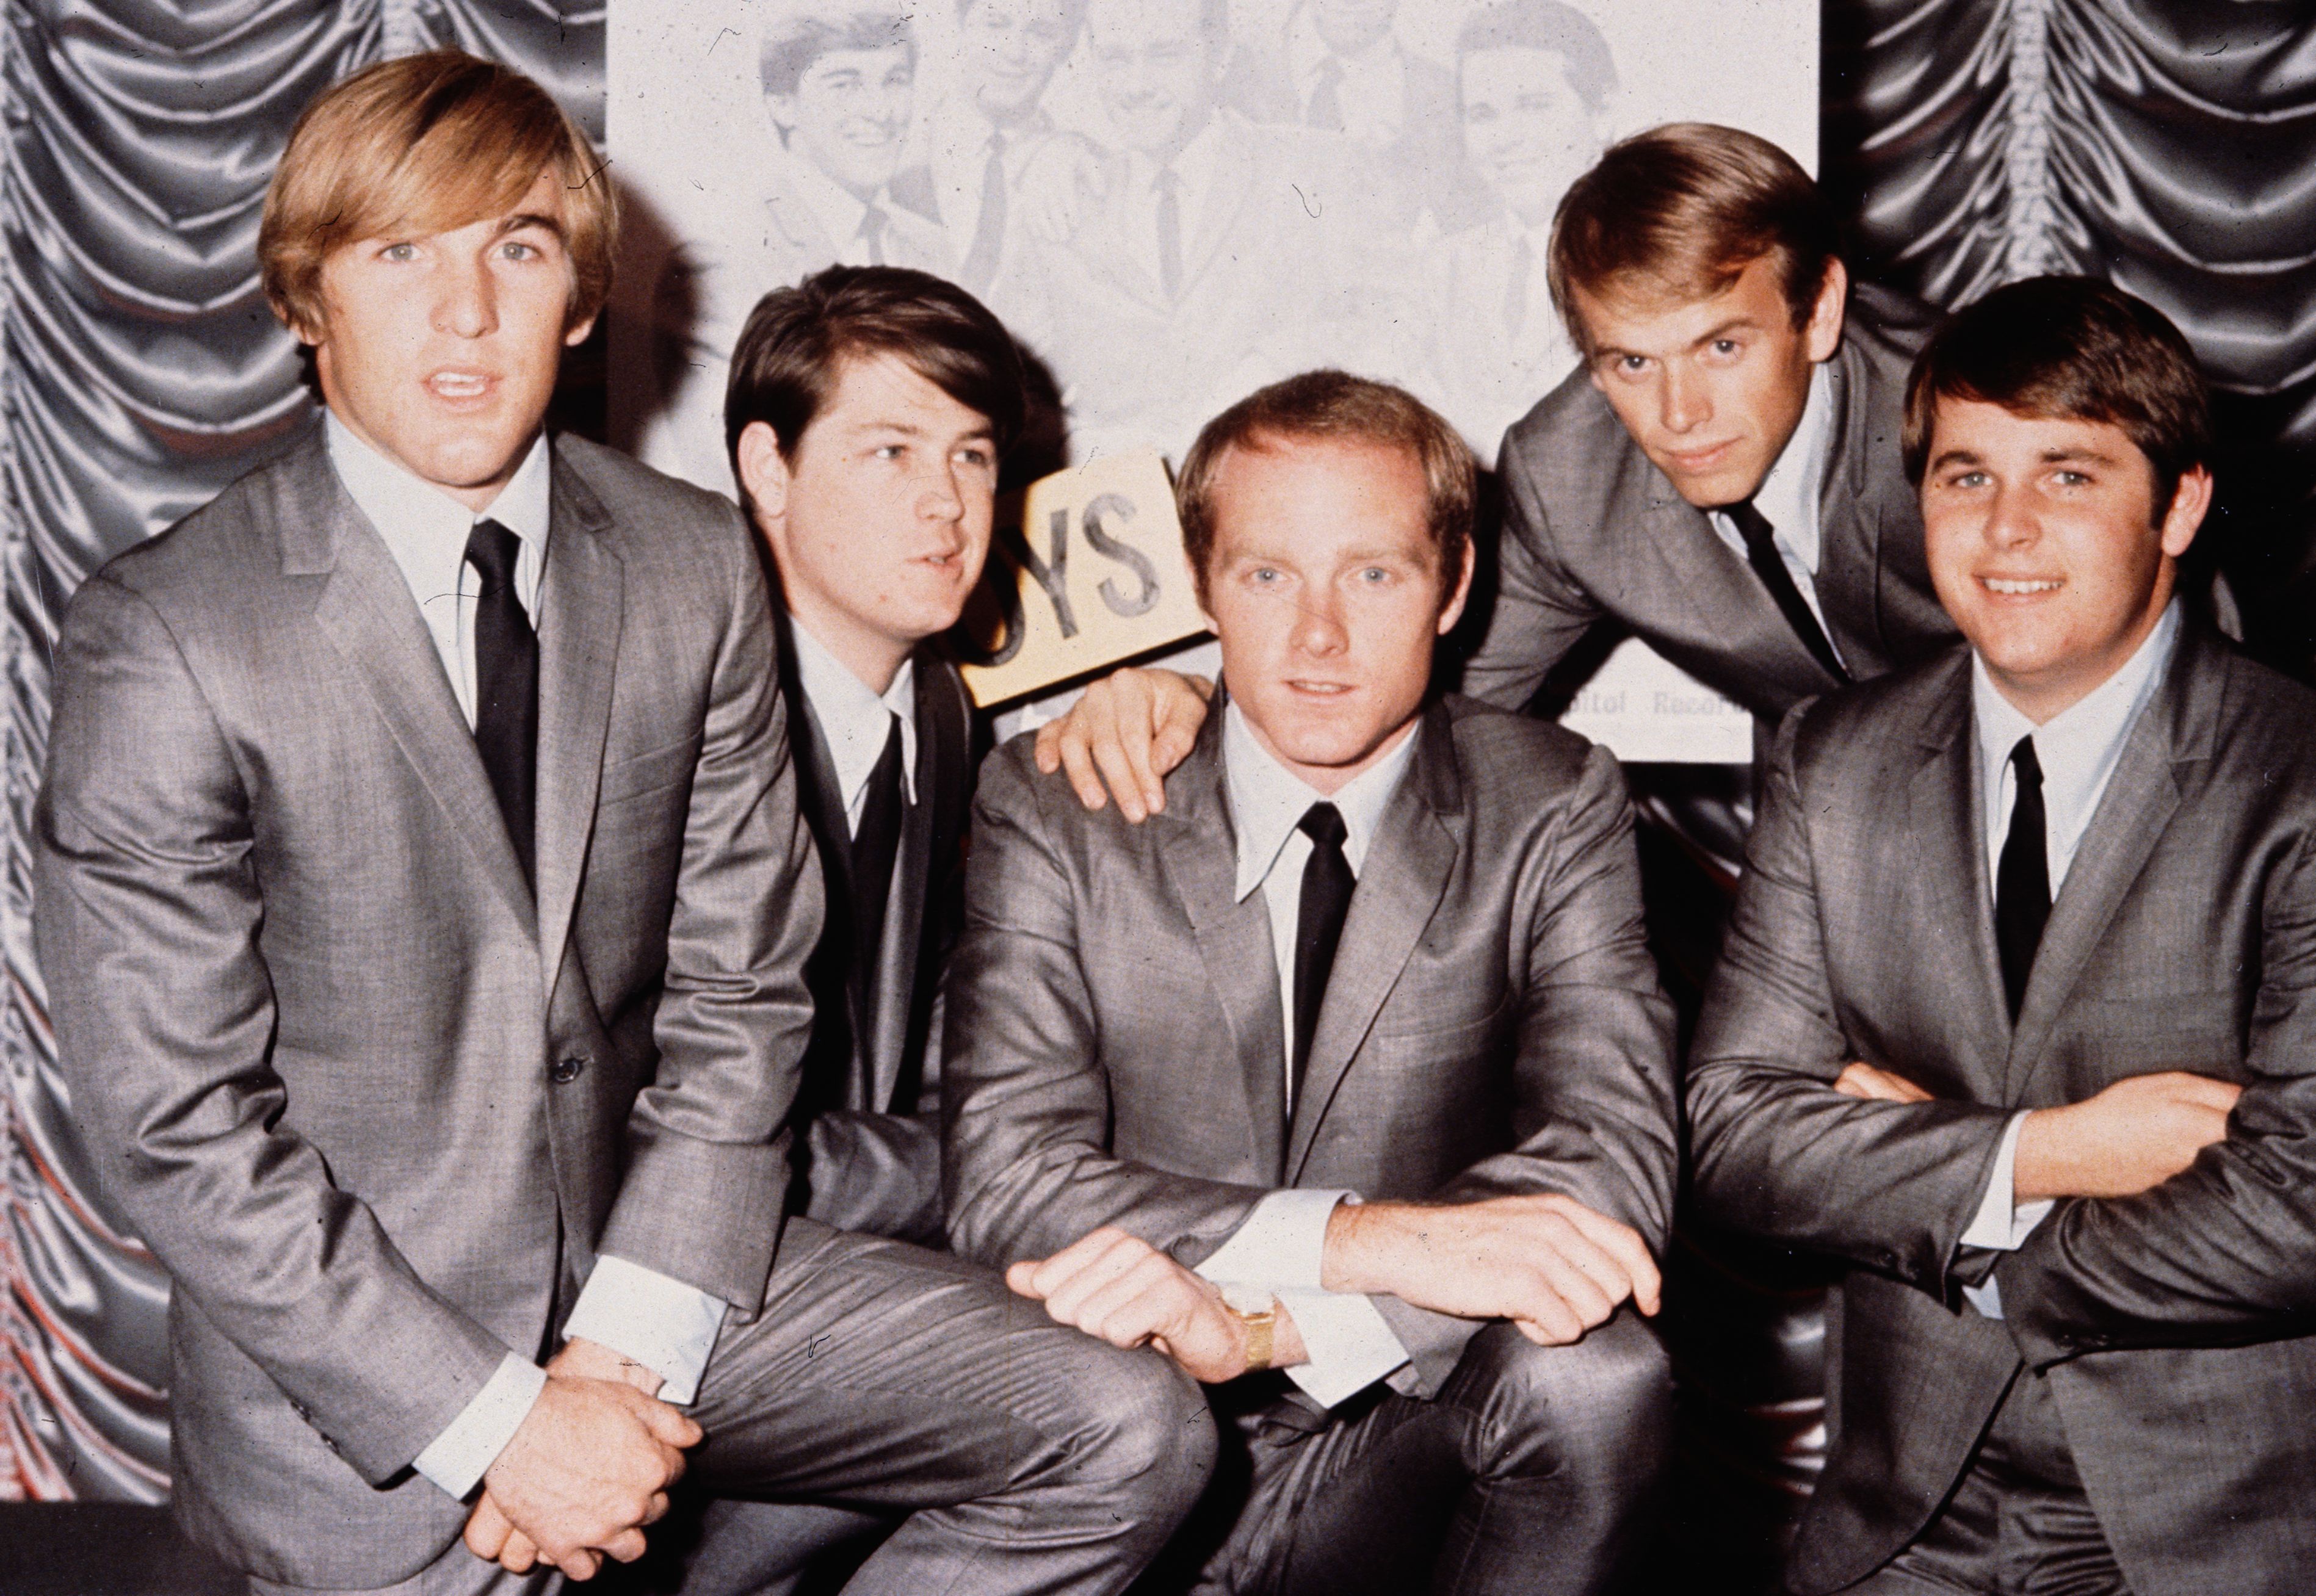 The Beach Boys Wallpapers